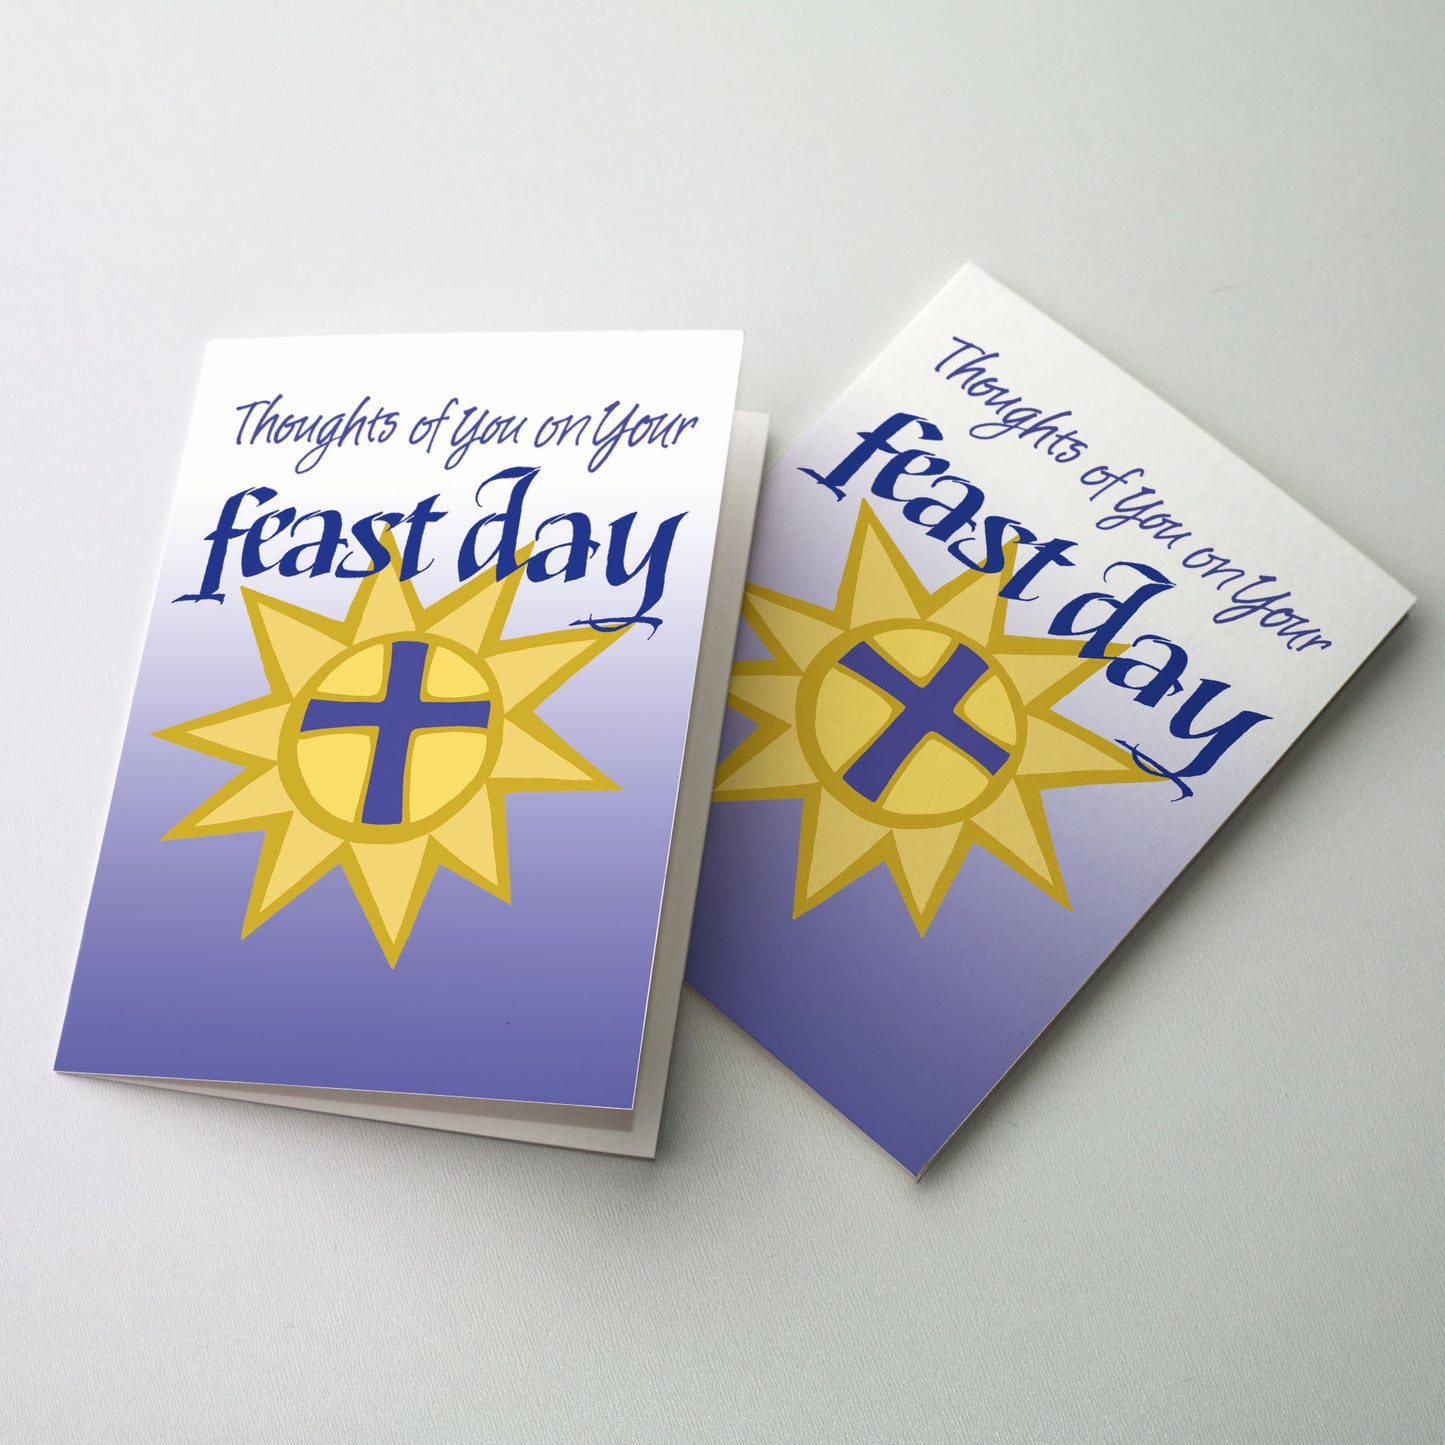 Thoughts of You on Your Feast Day - Feast Day Card